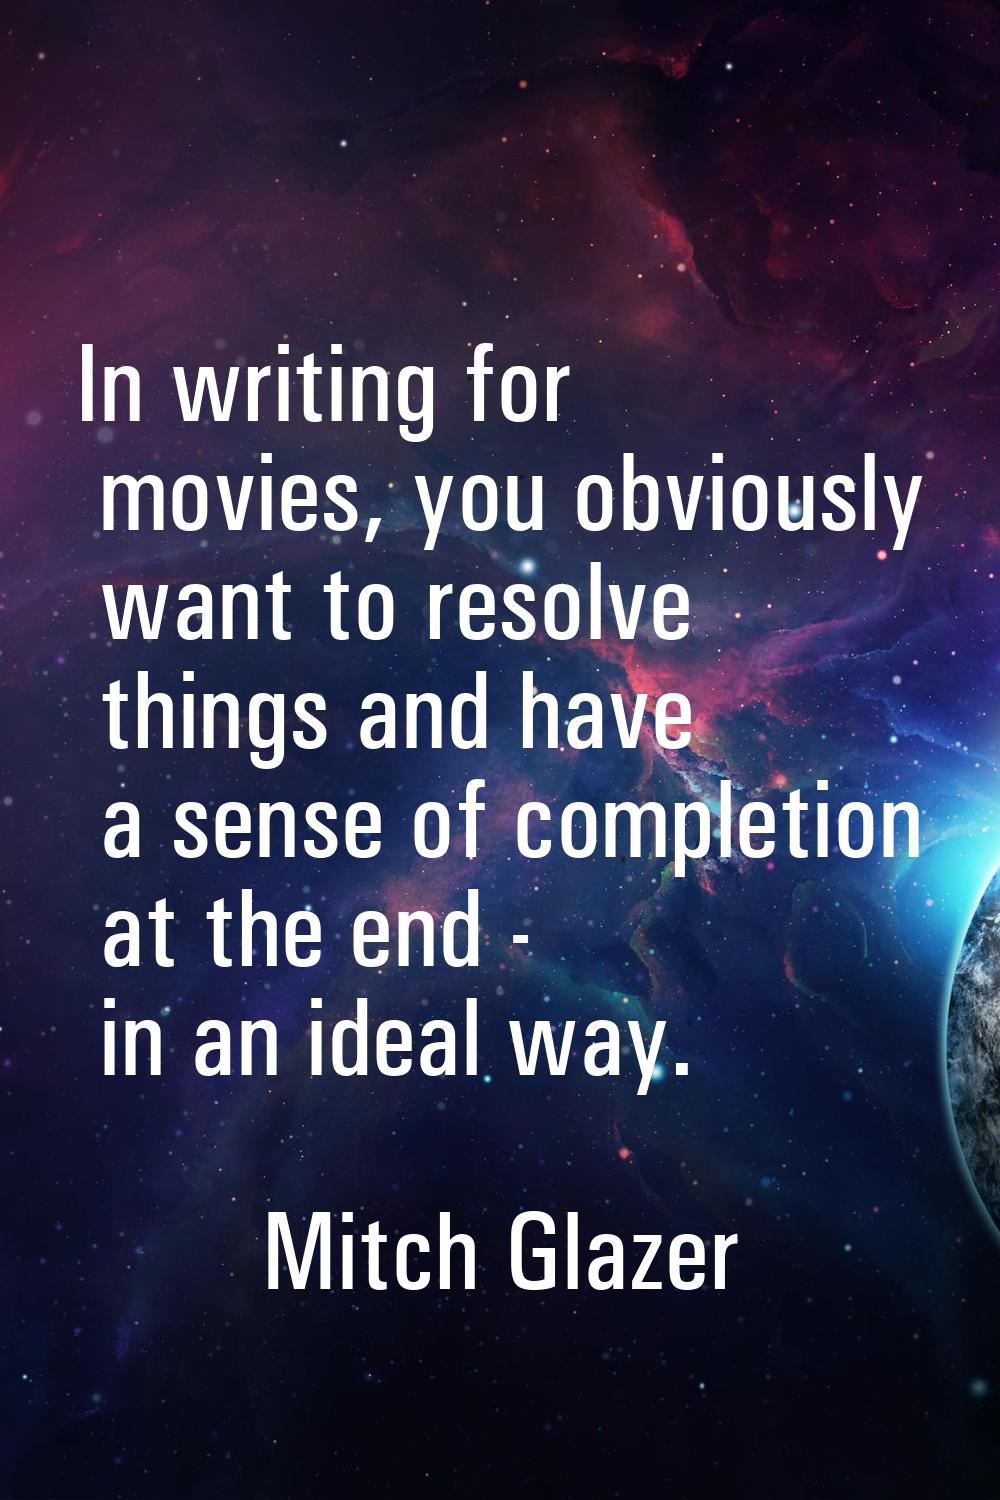 In writing for movies, you obviously want to resolve things and have a sense of completion at the e